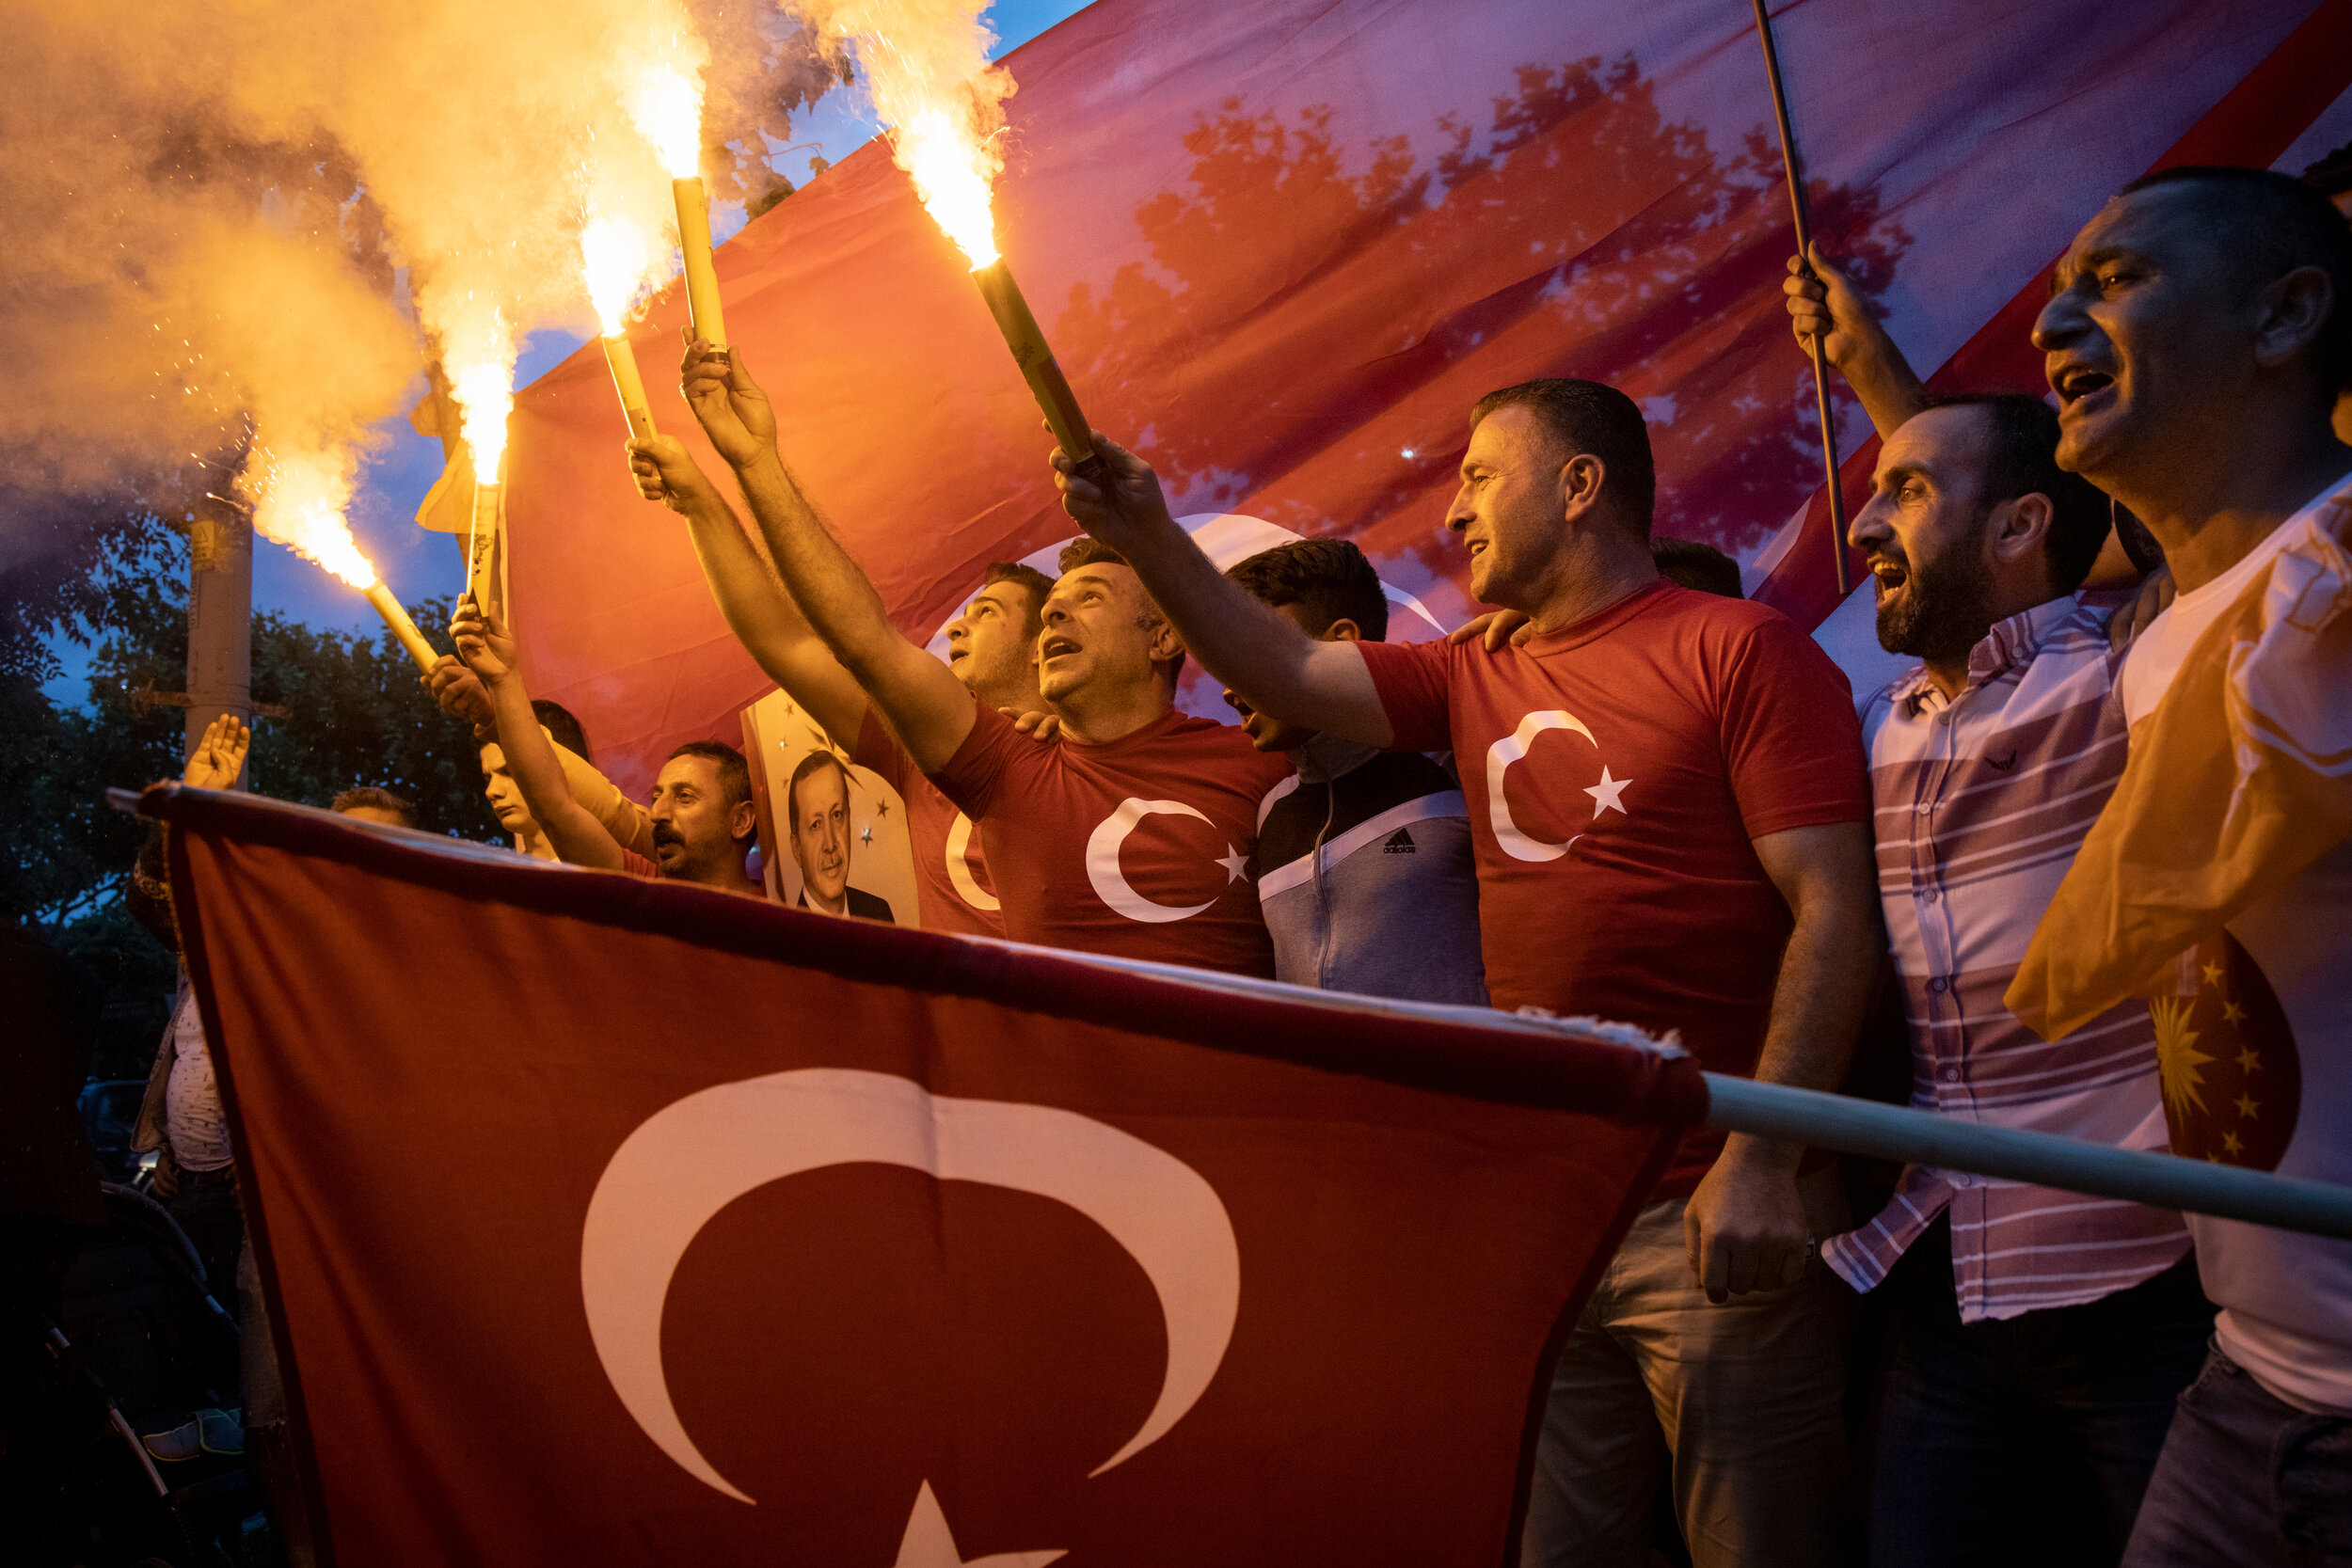  Supporters of Turkey's Justice and Development Party (AKP) react to preliminary election results at the party's headquarters in Istanbul, Turkey, on Sunday, June 24, 2018. 